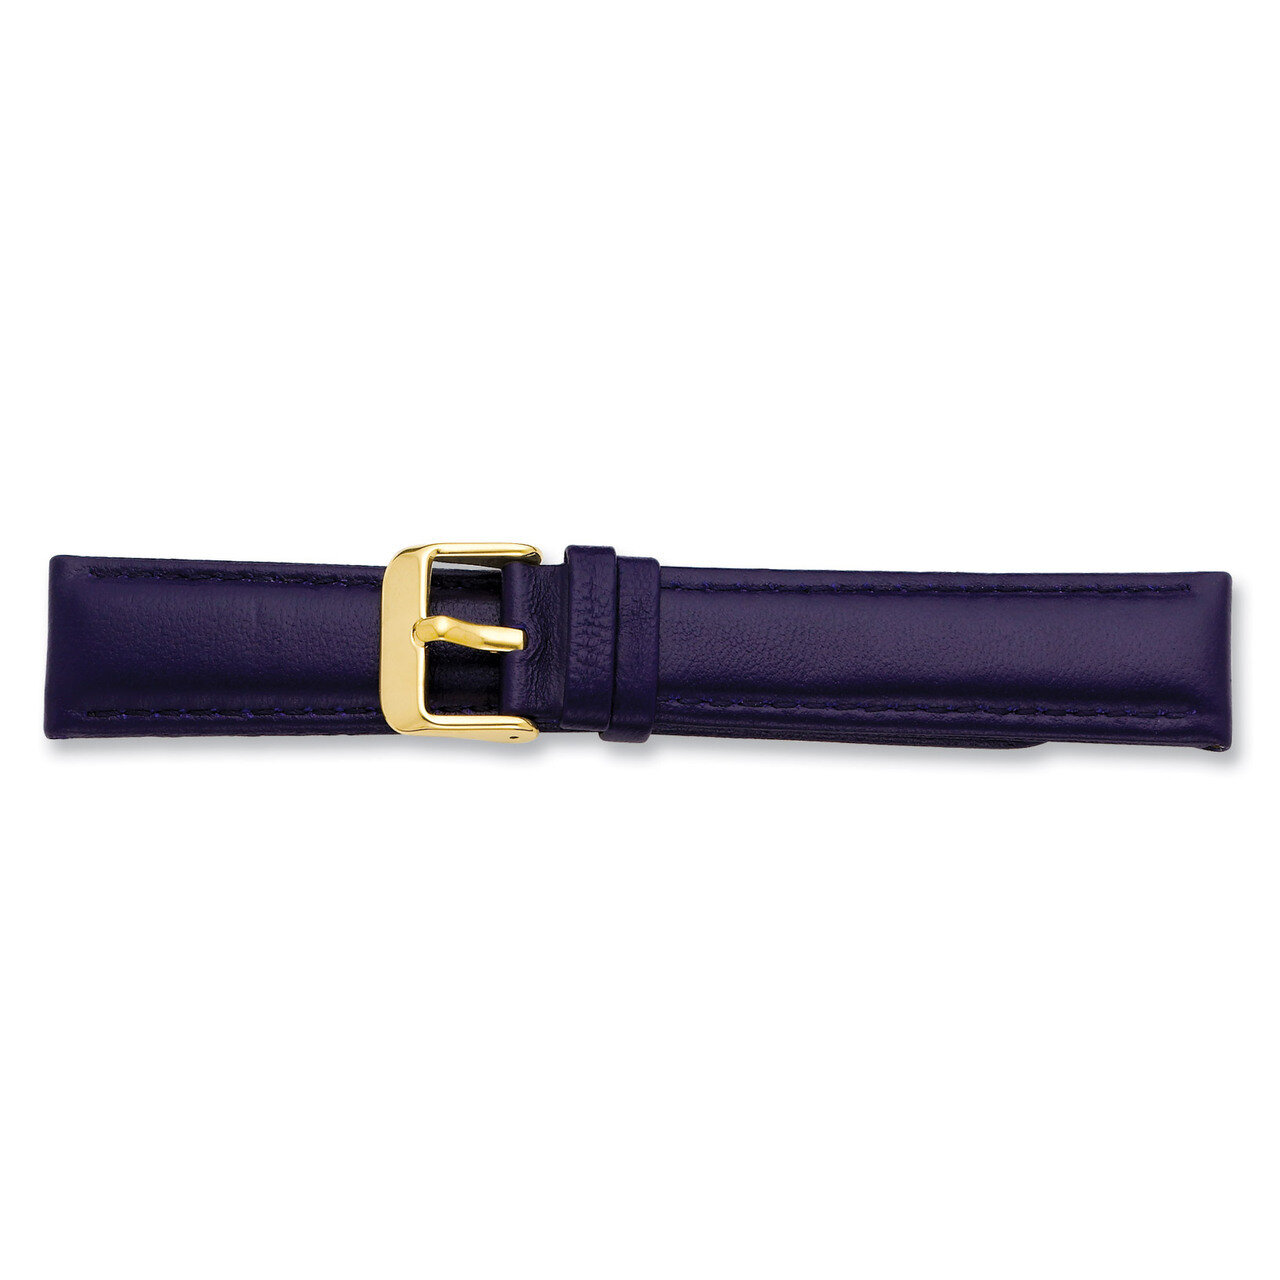 18mm Navy Glove Leather Buckle Watch Band 7.75 Inch Gold-tone BA198-18